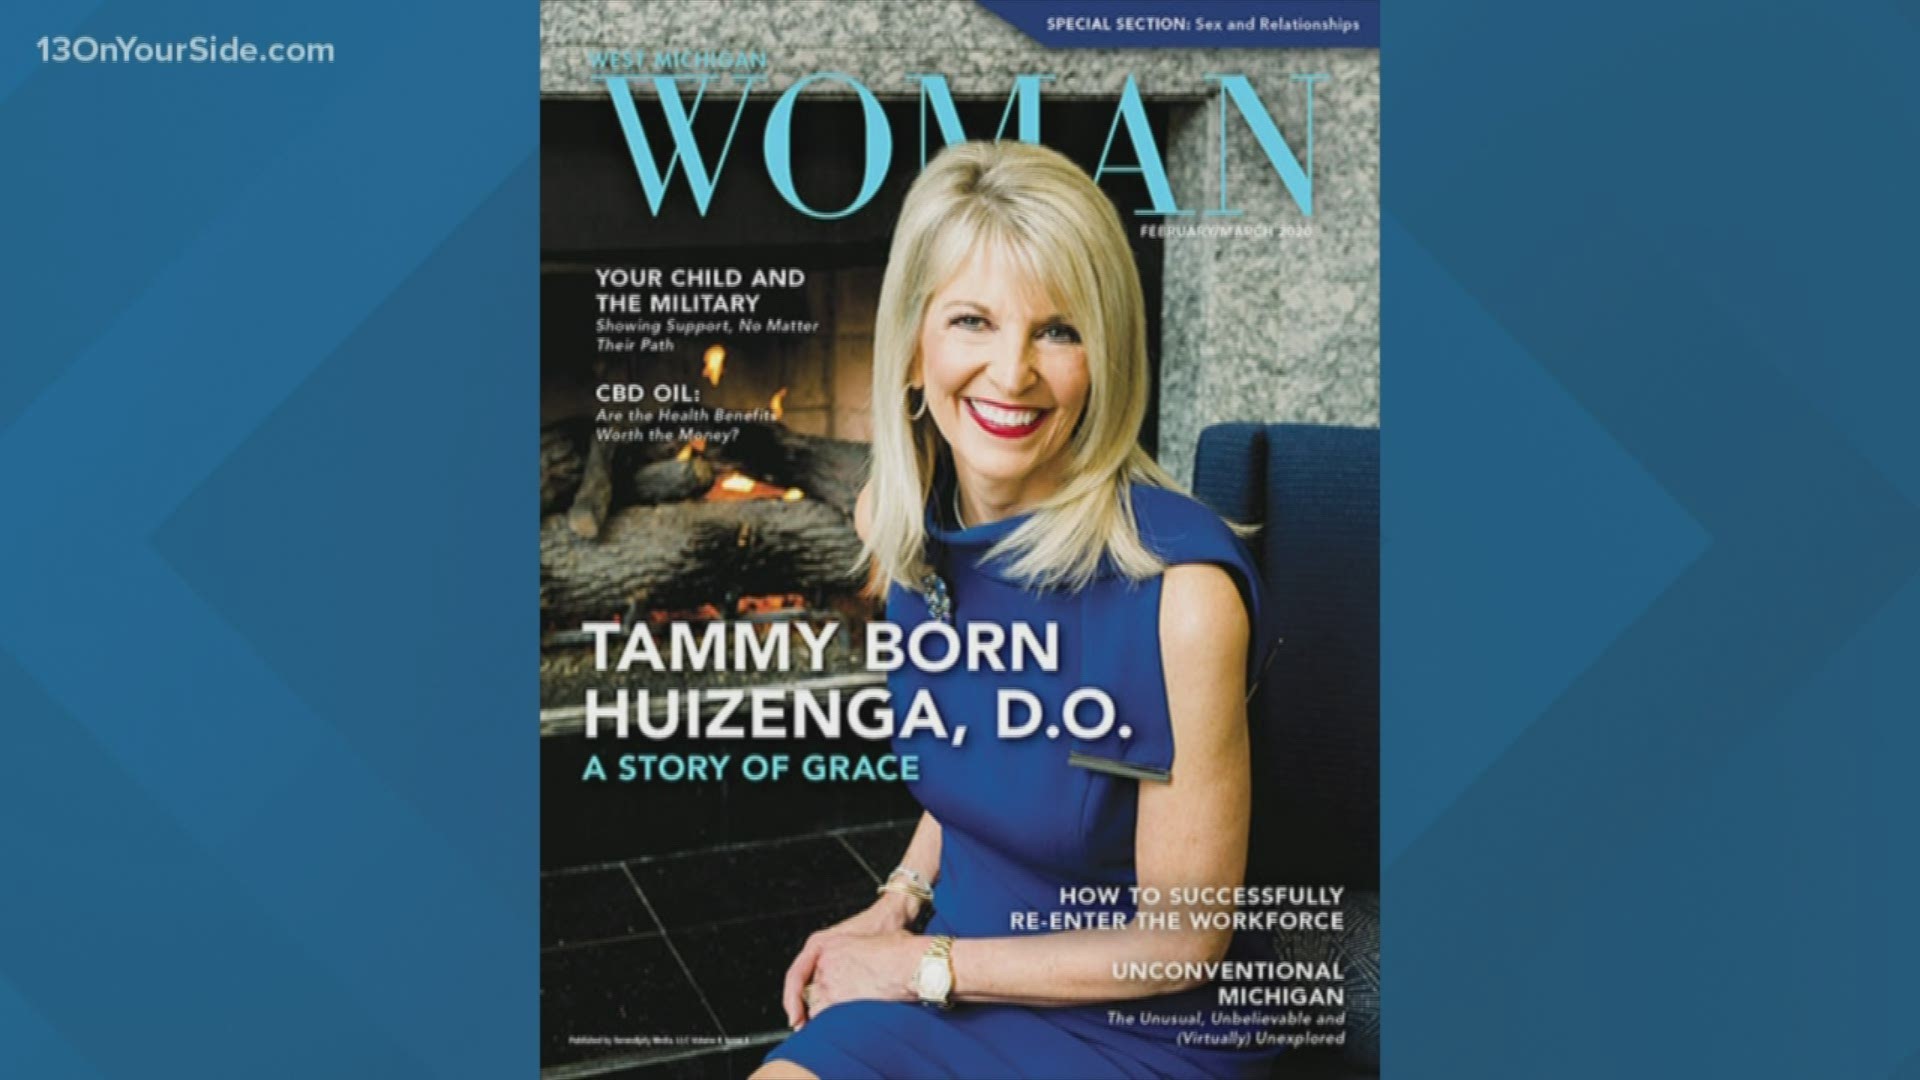 A new issue of West Michigan Woman has been released and it's time to get an inside look at it!